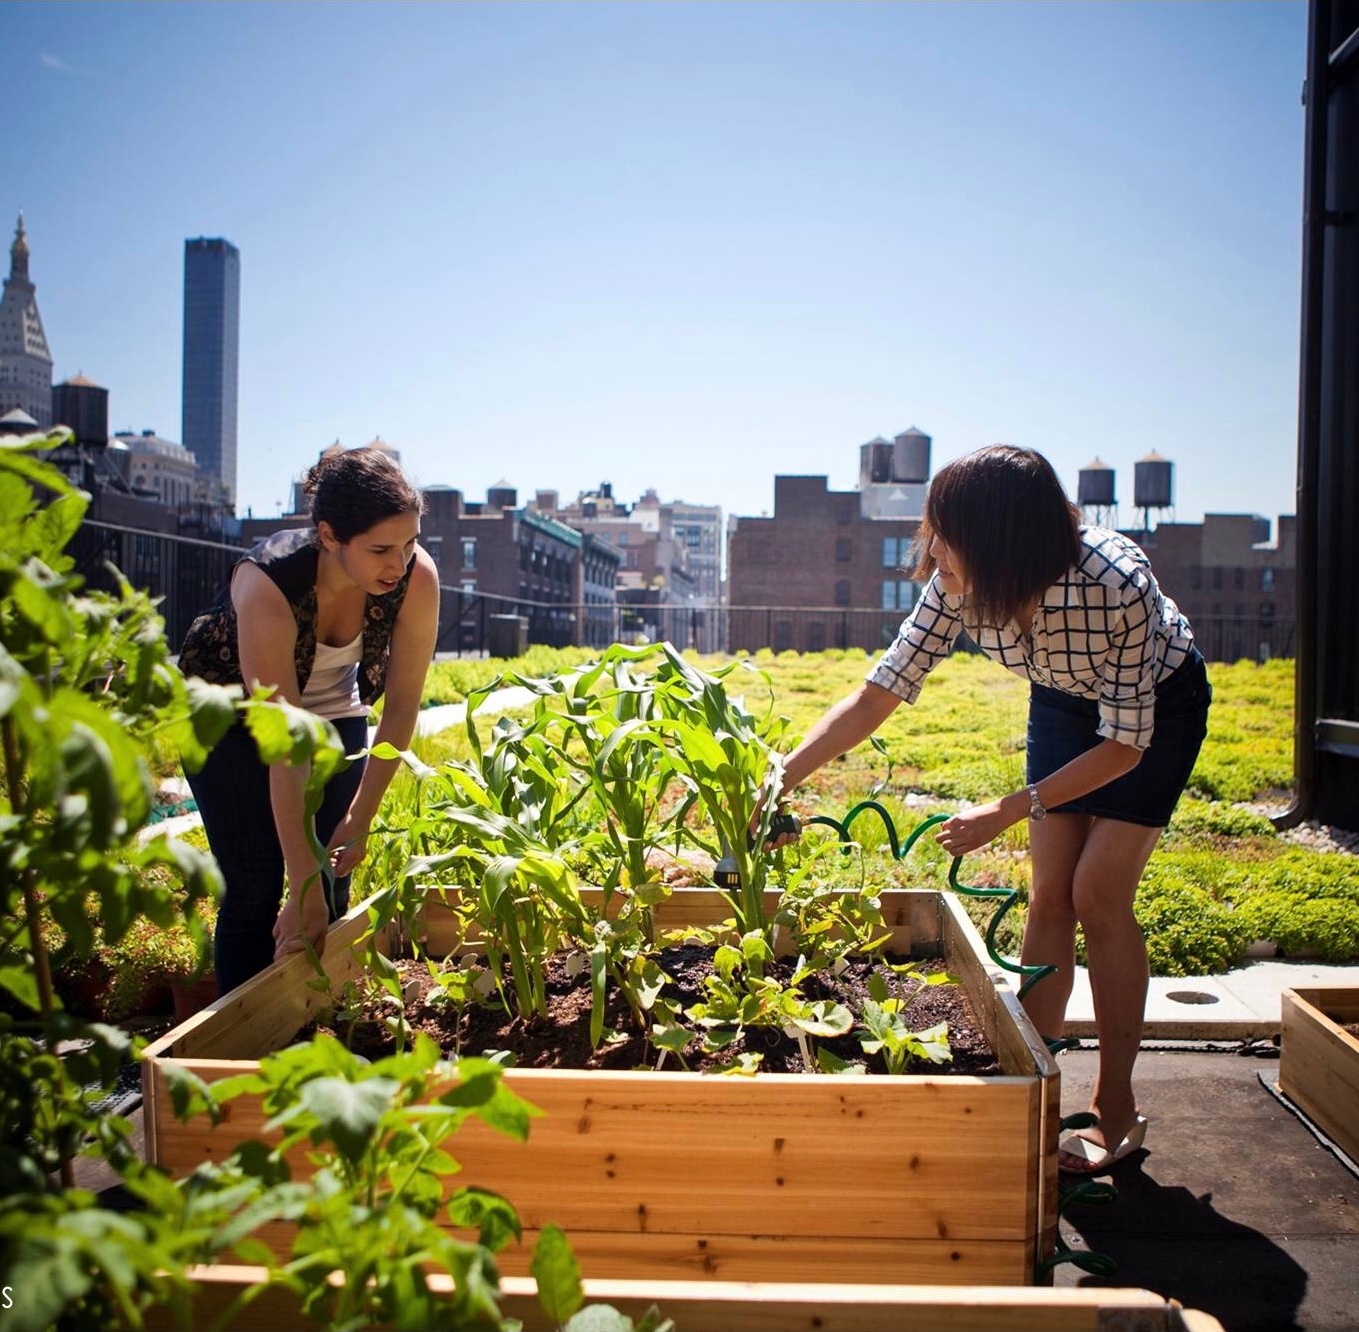 A sustainability expert is gardening on a rooftop in Brooklyn